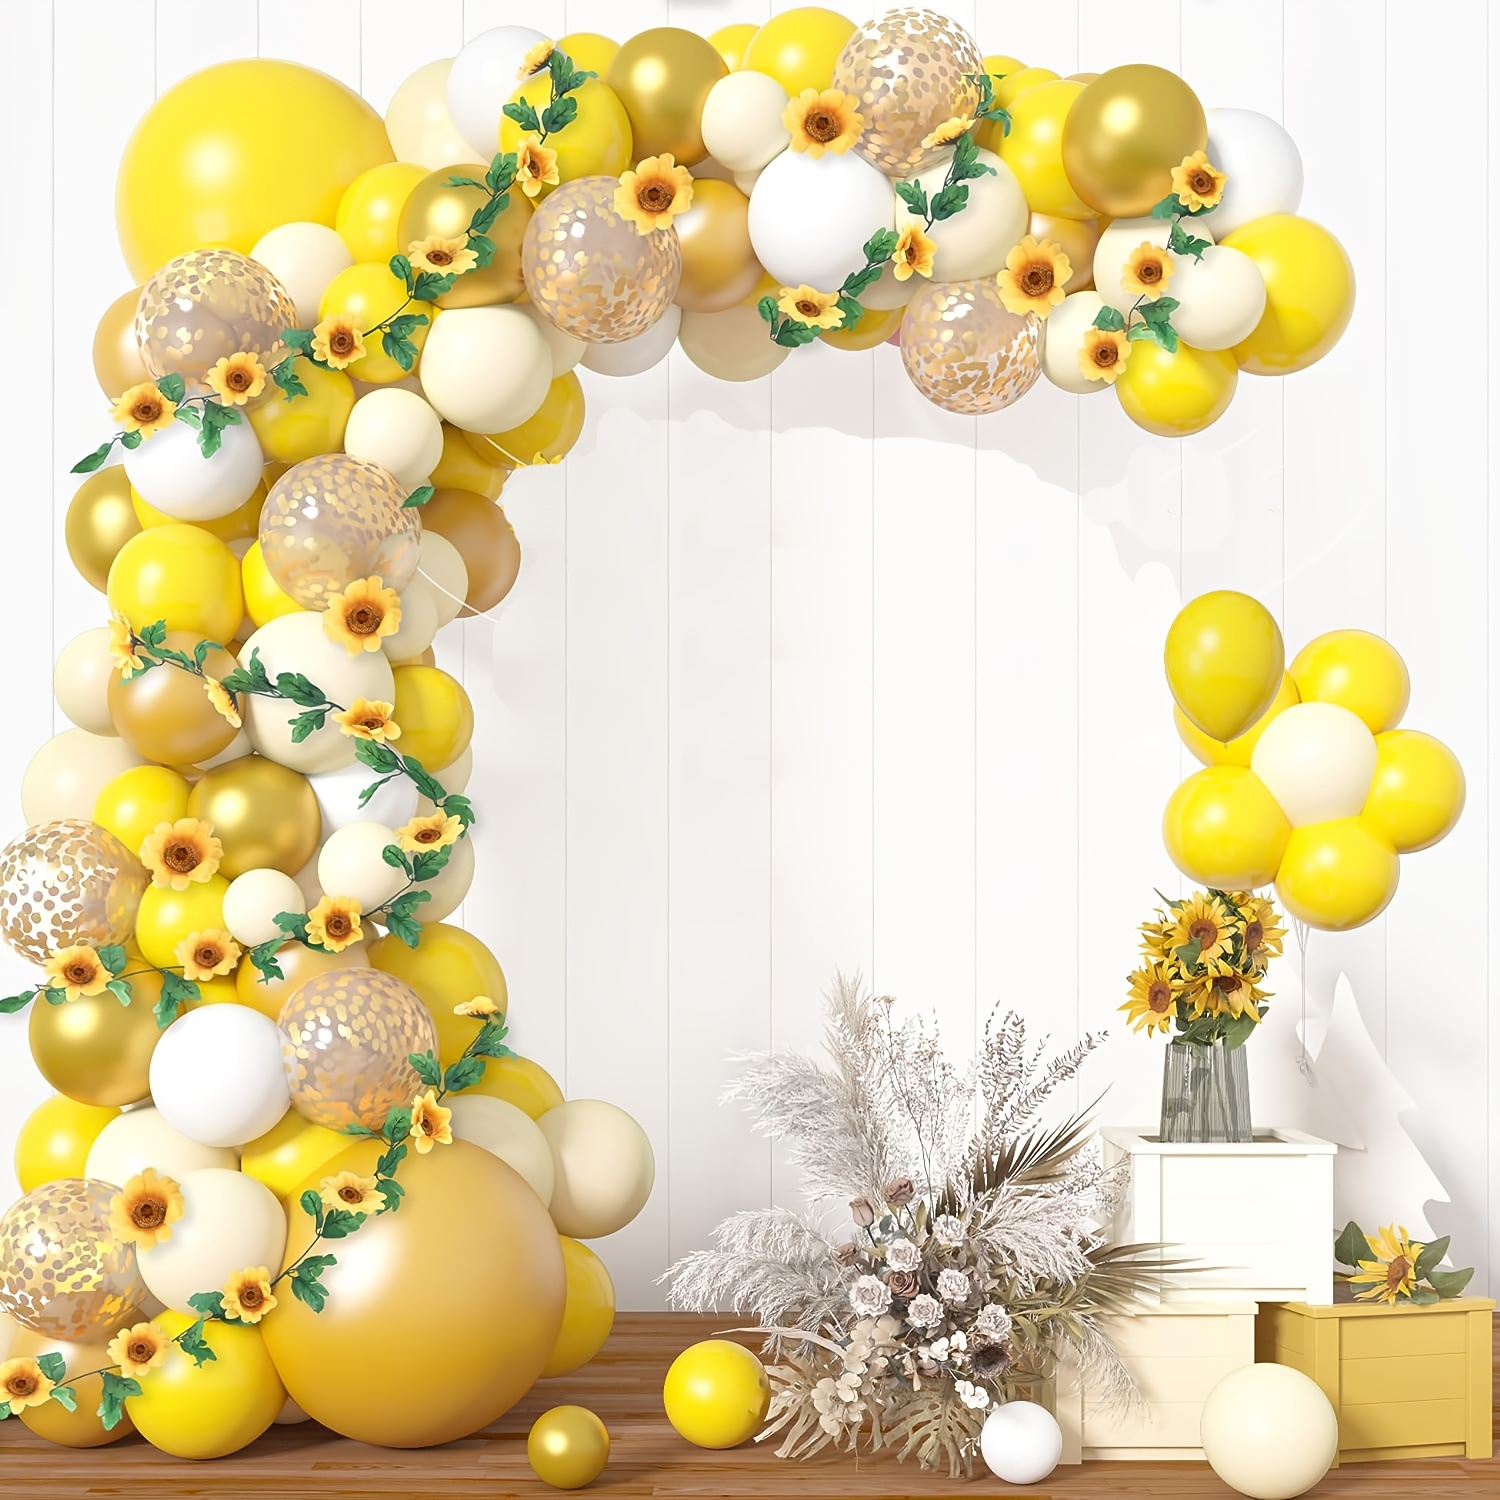 

111pcs Sunflower Decorations Sunflower Balloons Garland Arch Kit Yellow Balloons With Sunflower Vine For Sunflower Party Decorations Easter Gift